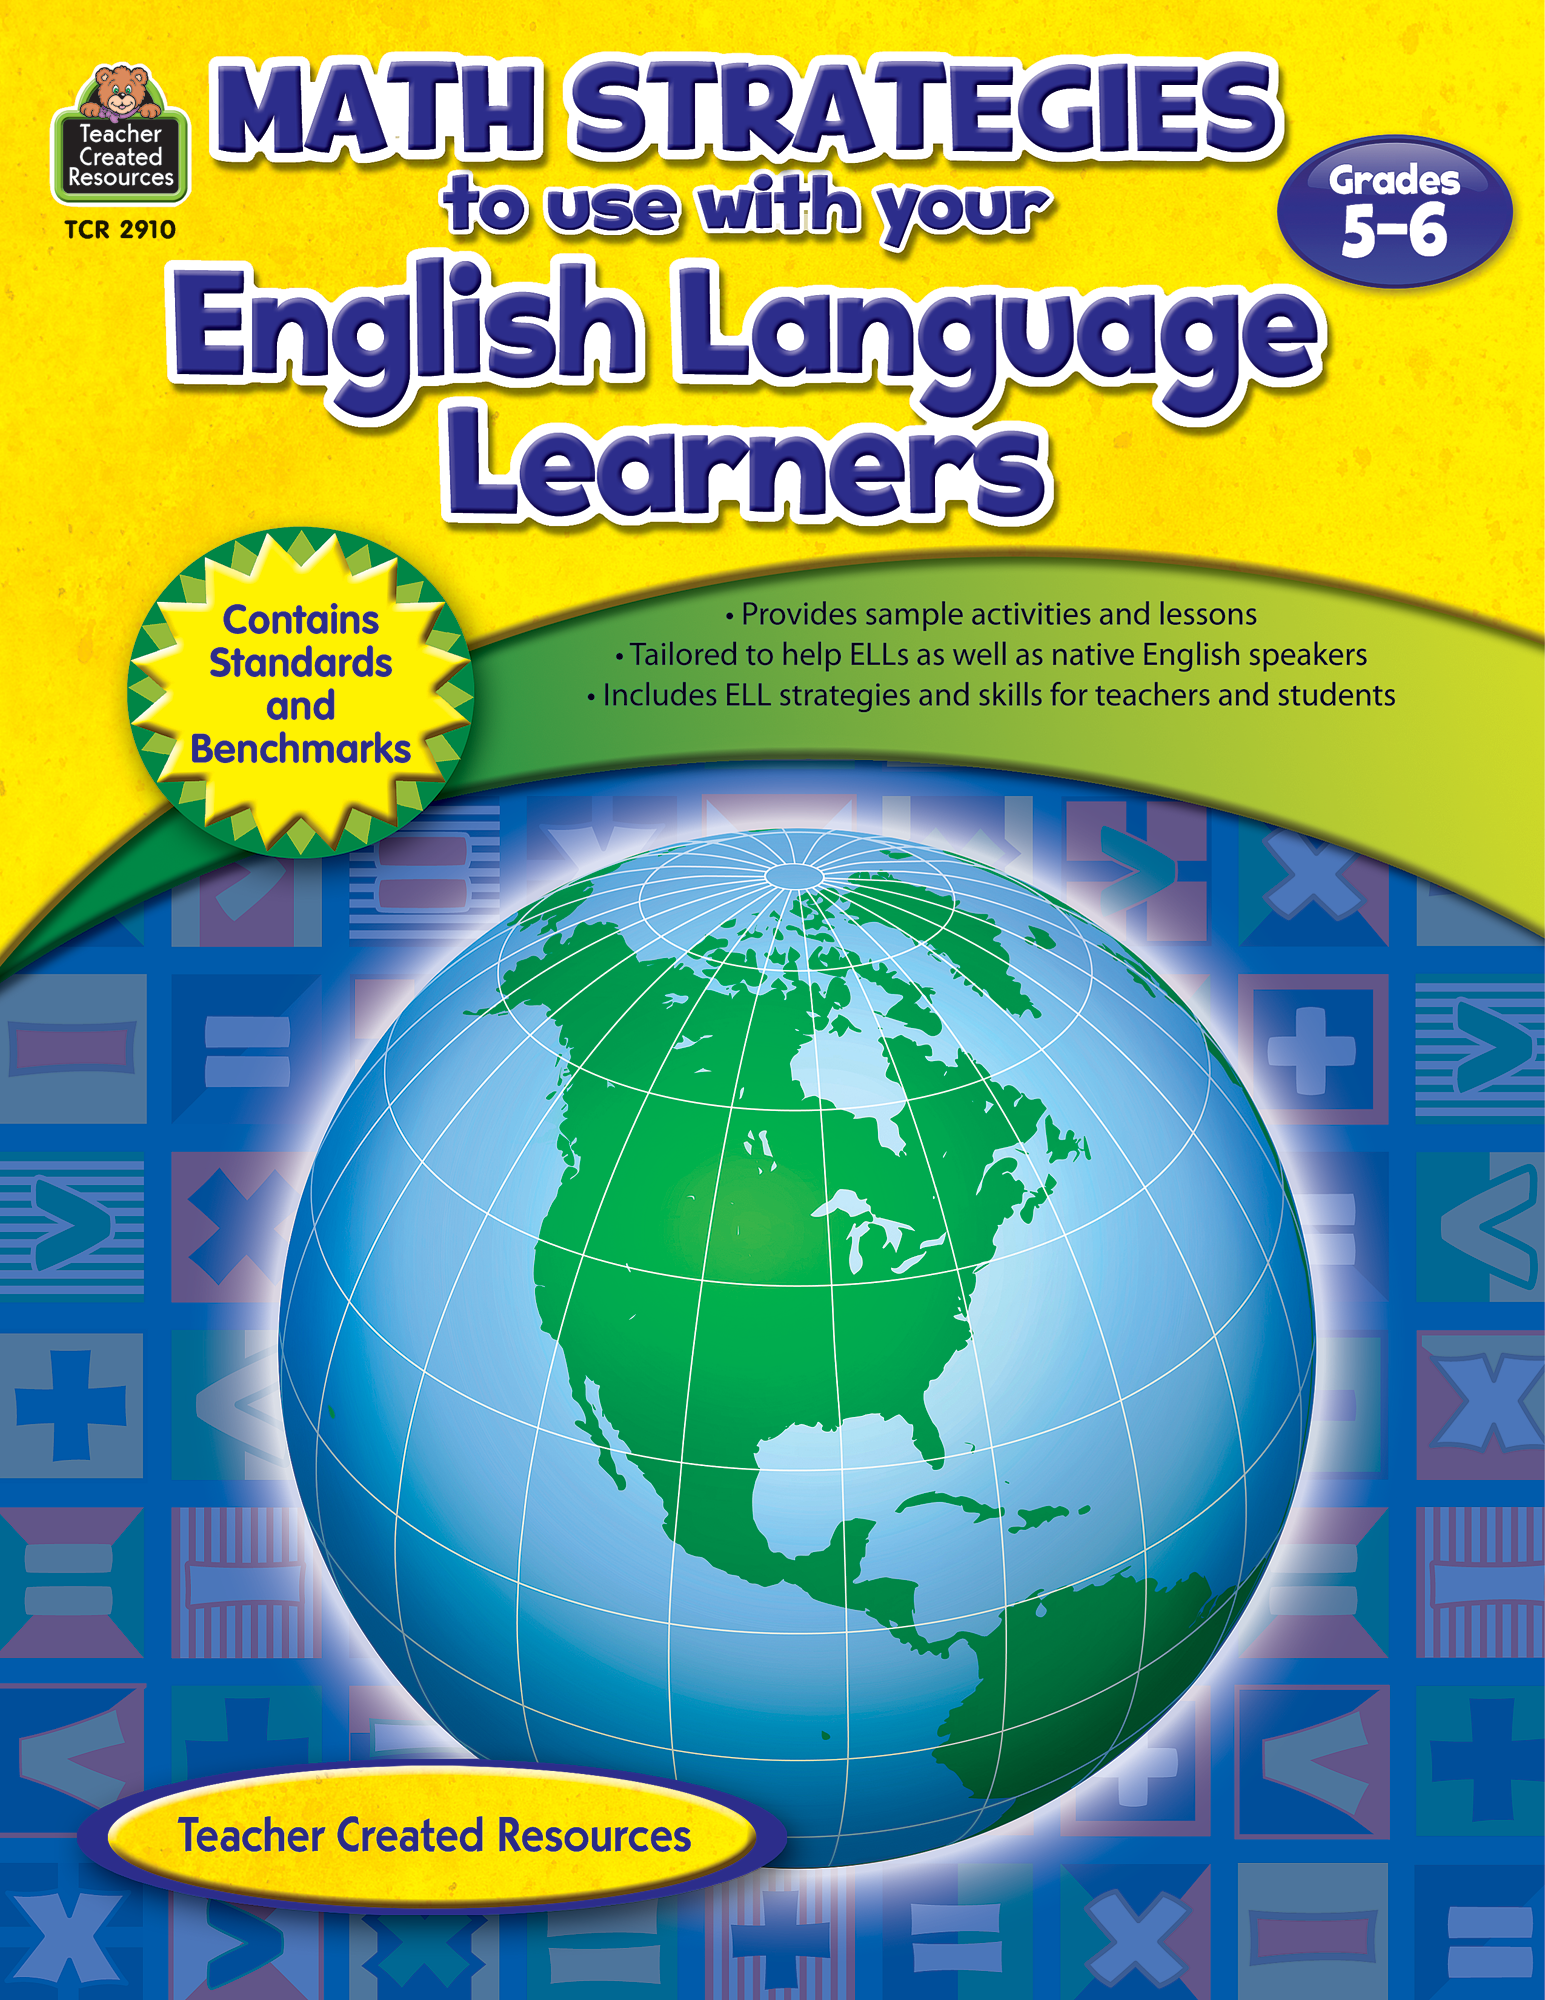 math-strategies-to-use-with-english-language-learners-gr-5-6-tcr2910-teacher-created-resources